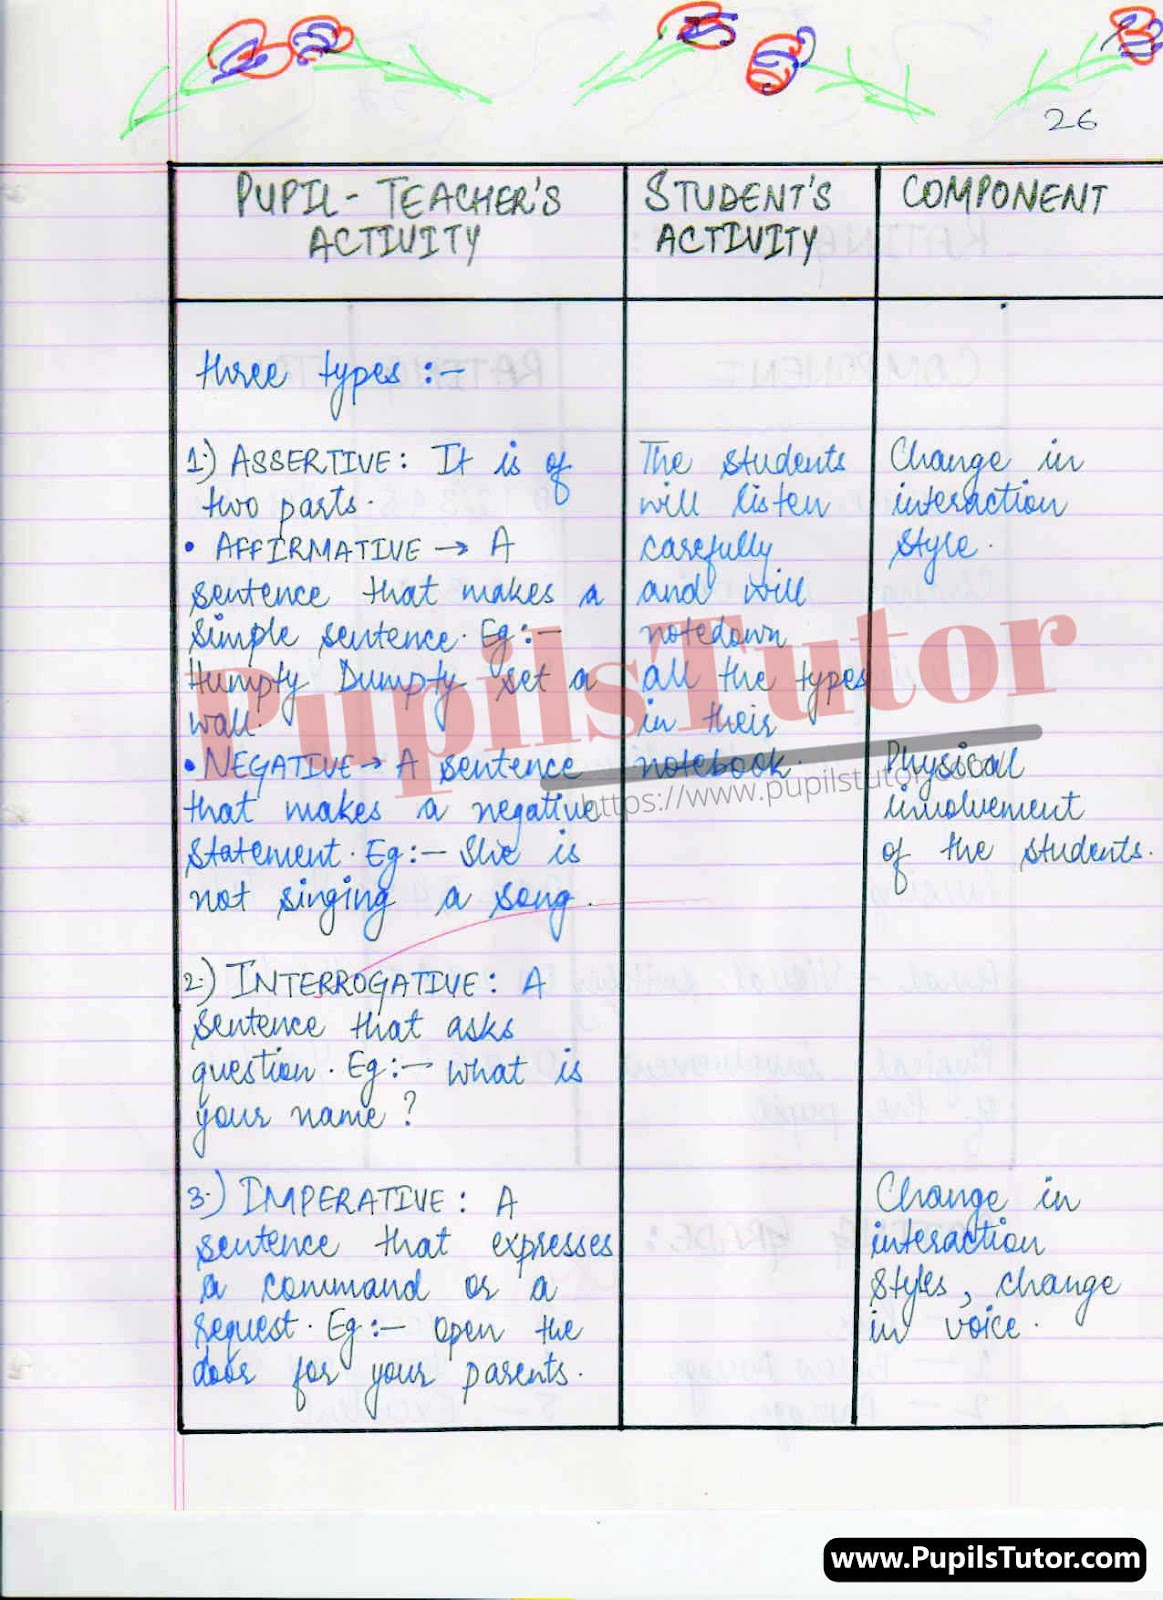 Class/Grade 4 To 9 English Microteaching Skill Of Explanation Lesson Plan On Types OF Sentences For CBSE NCERT KVS School And University College Teachers – (Page And Image Number 3) – www.pupilstutor.com